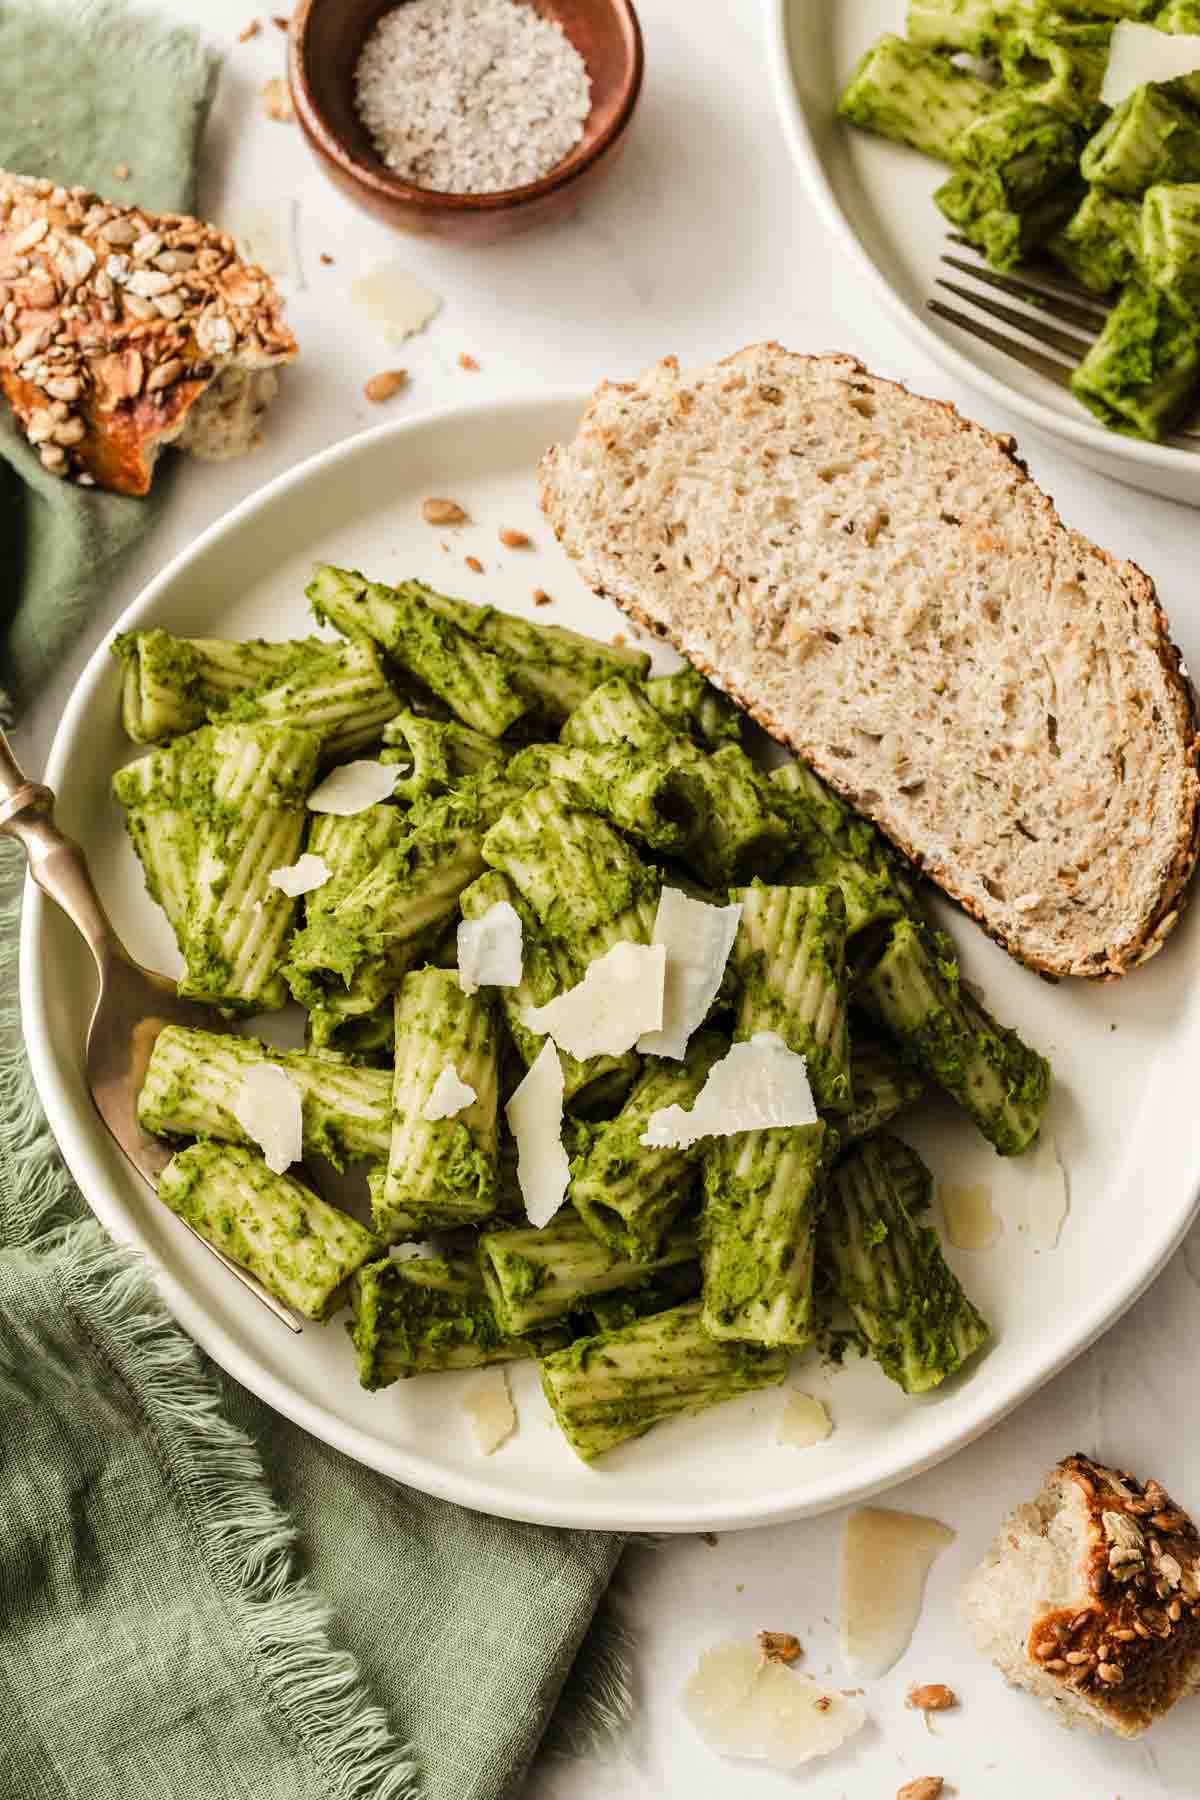 White plate of kale pesto pasta with sliced bread on side.